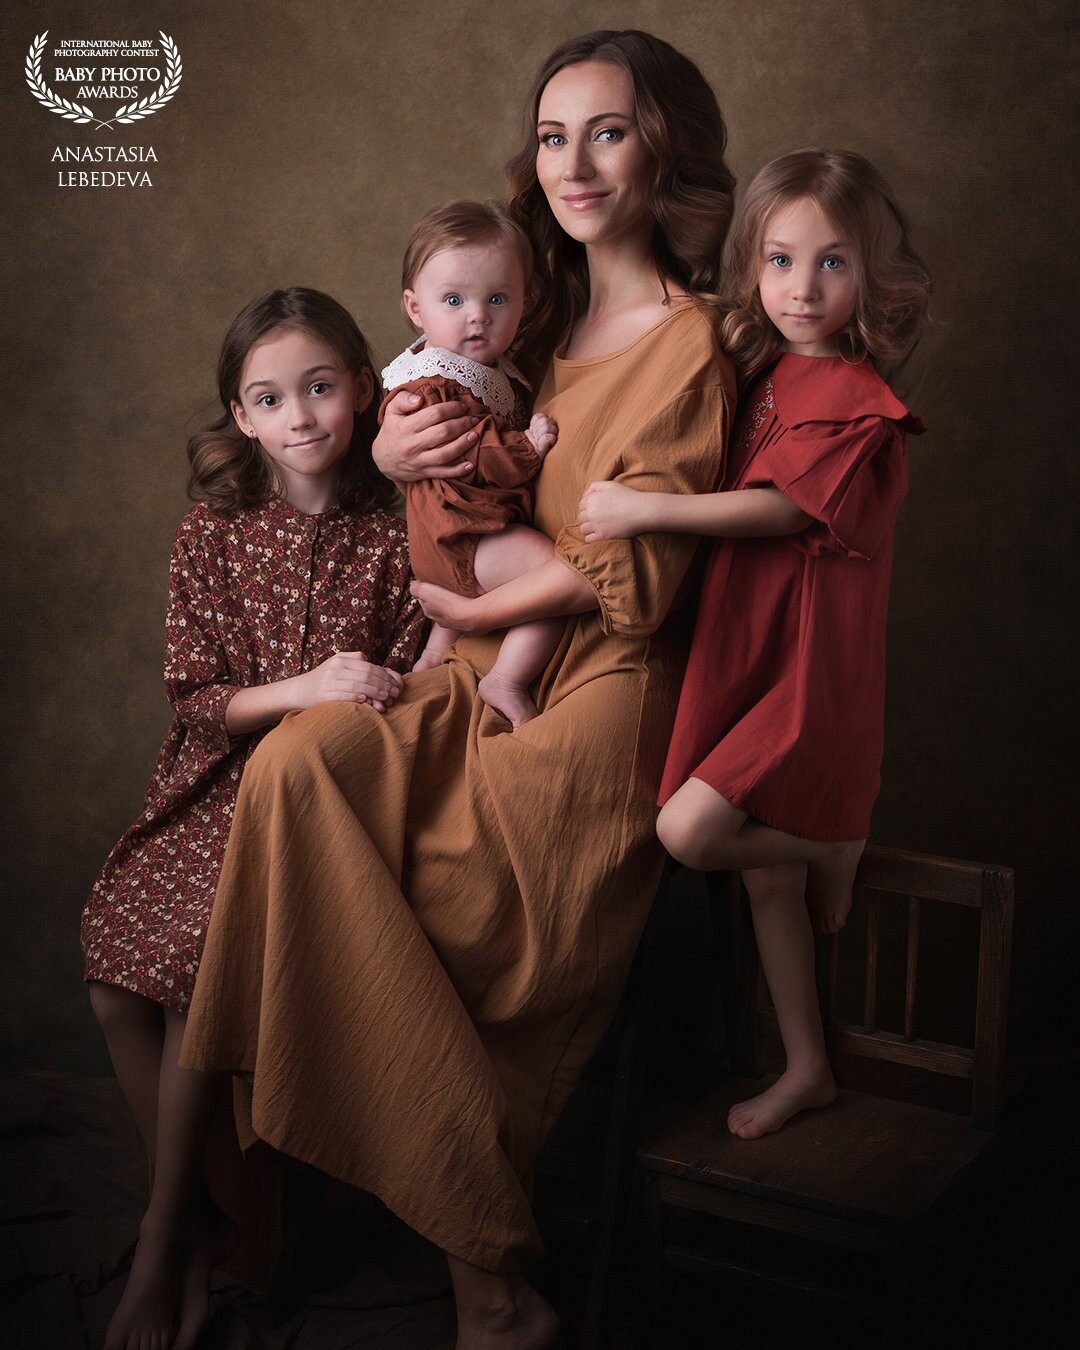 Hello everyone. I am happy that as many as three of my works were selected for the 69th collection.<br />
In this photo, a mother is surrounded by three beautiful daughters. Looking at this photo, I understand that this is the real happiness to be a mother.